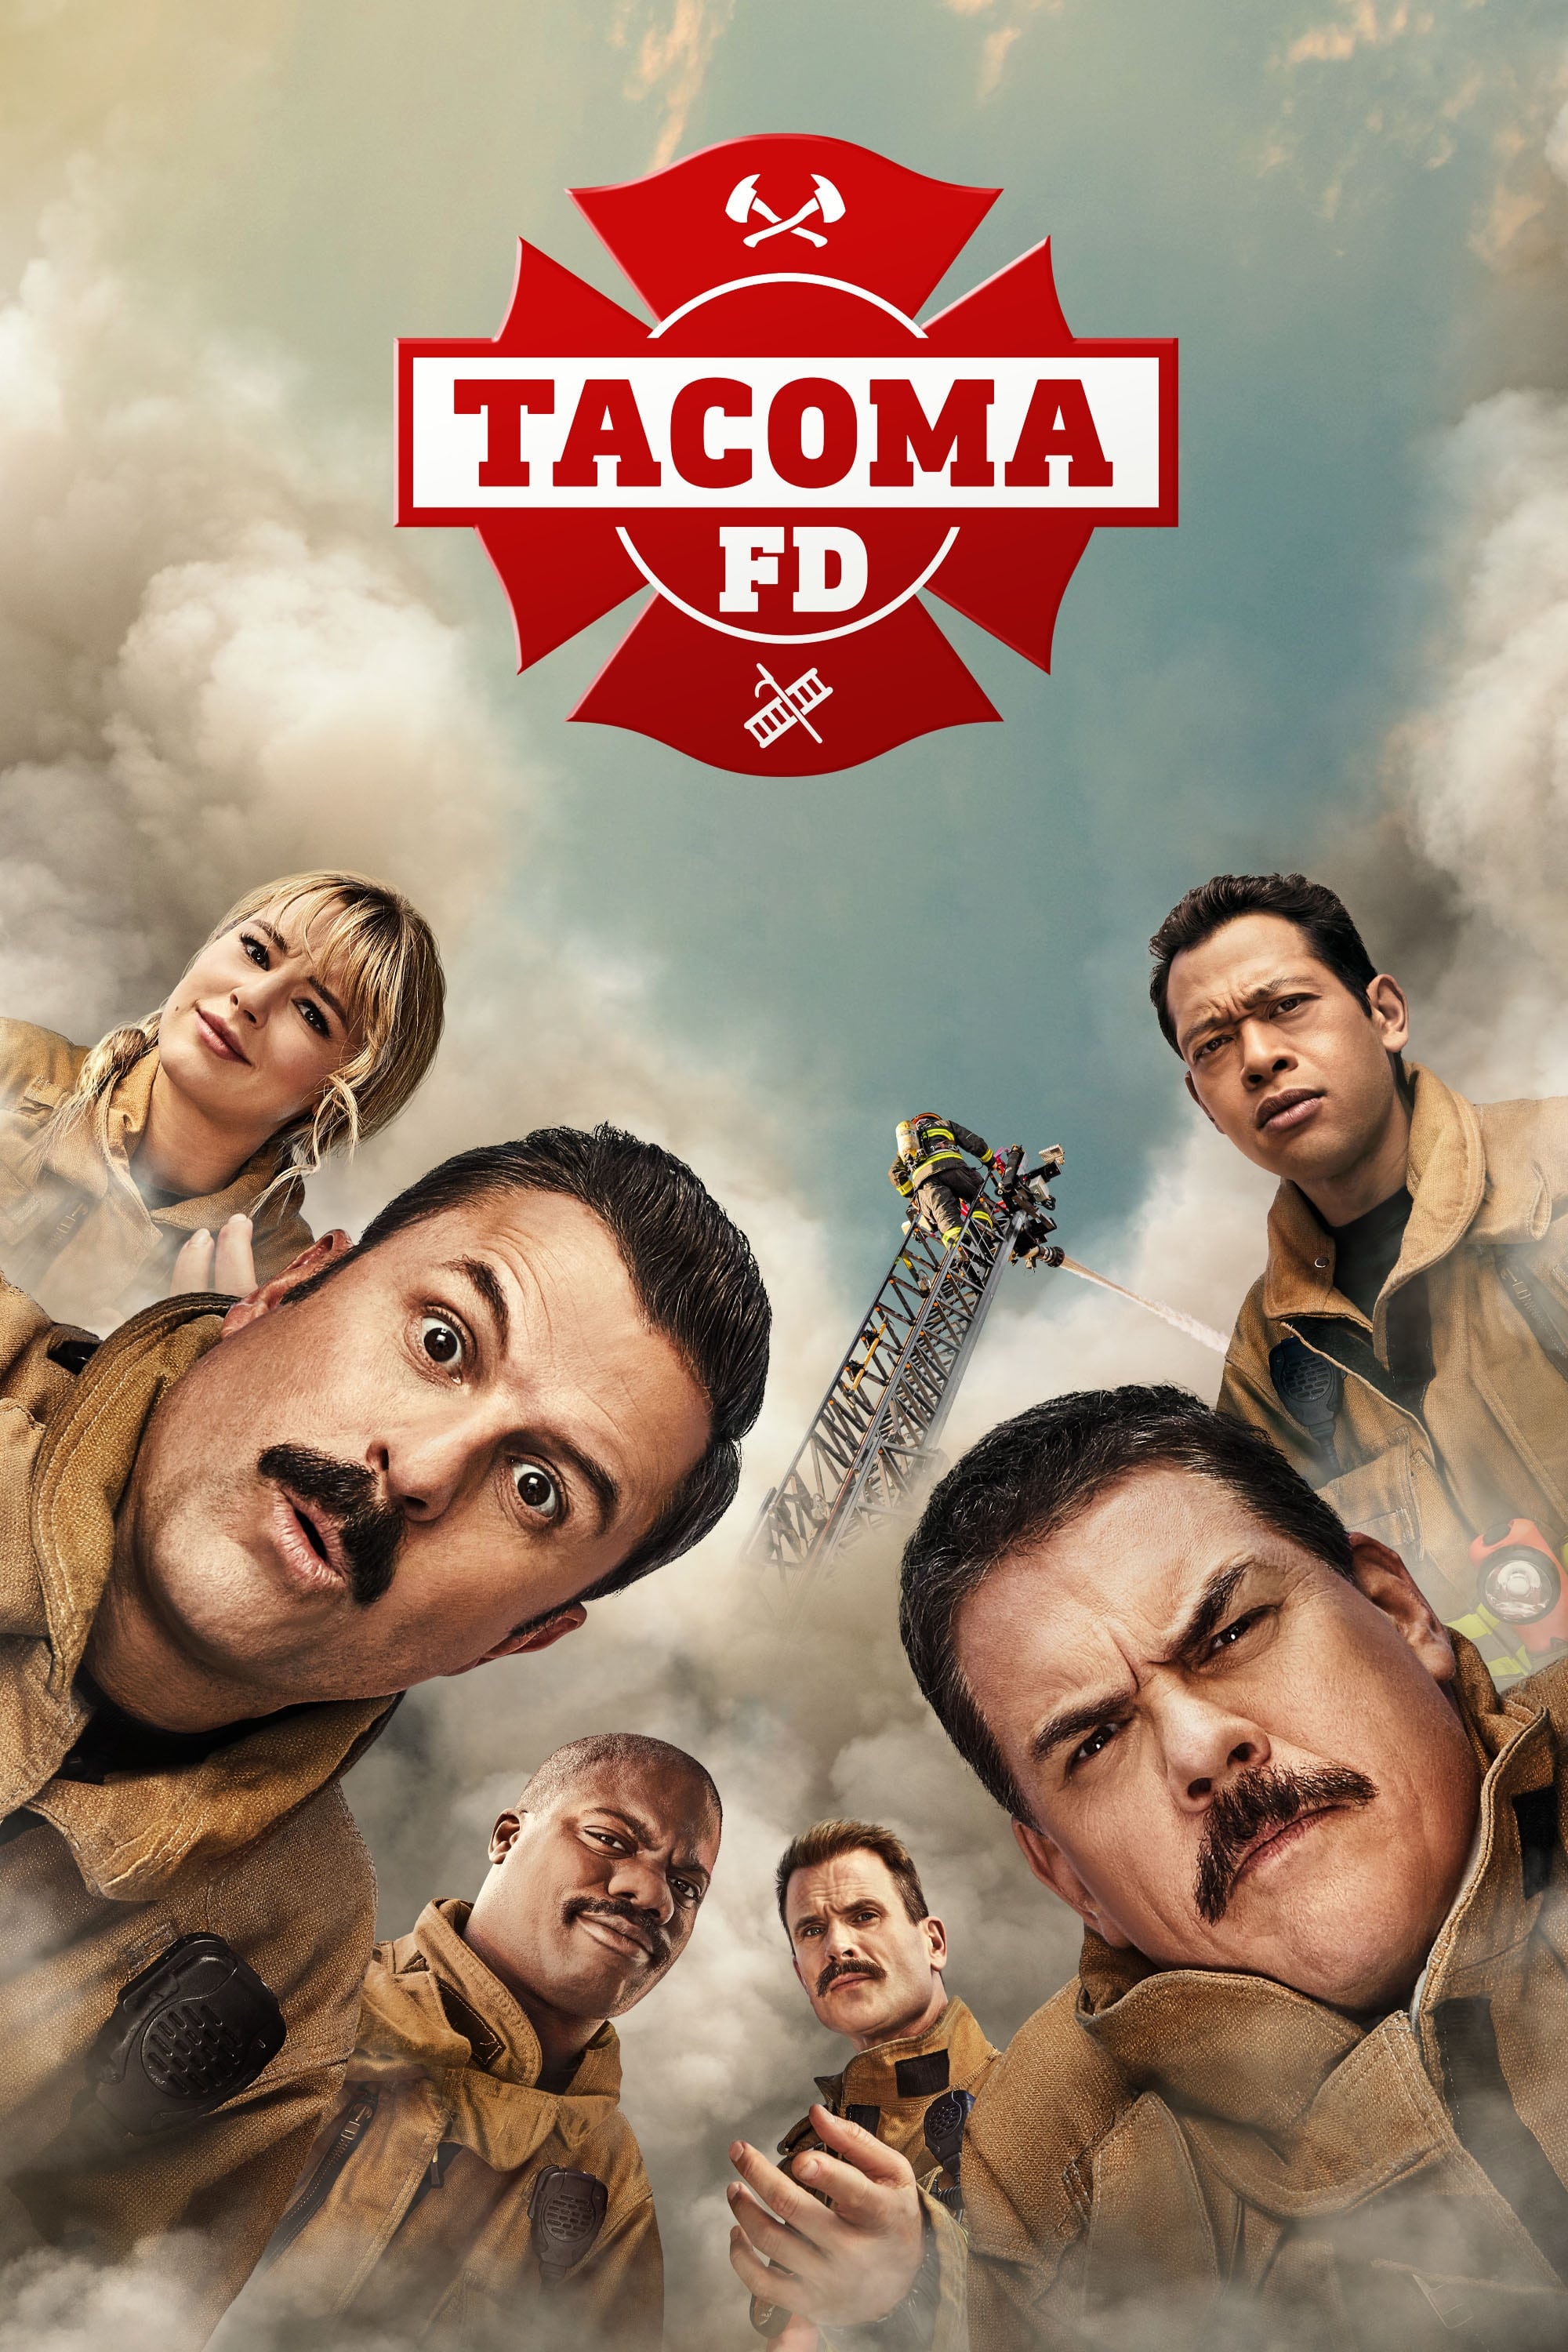 Tacoma FD TV Shows About Workplace Comedy